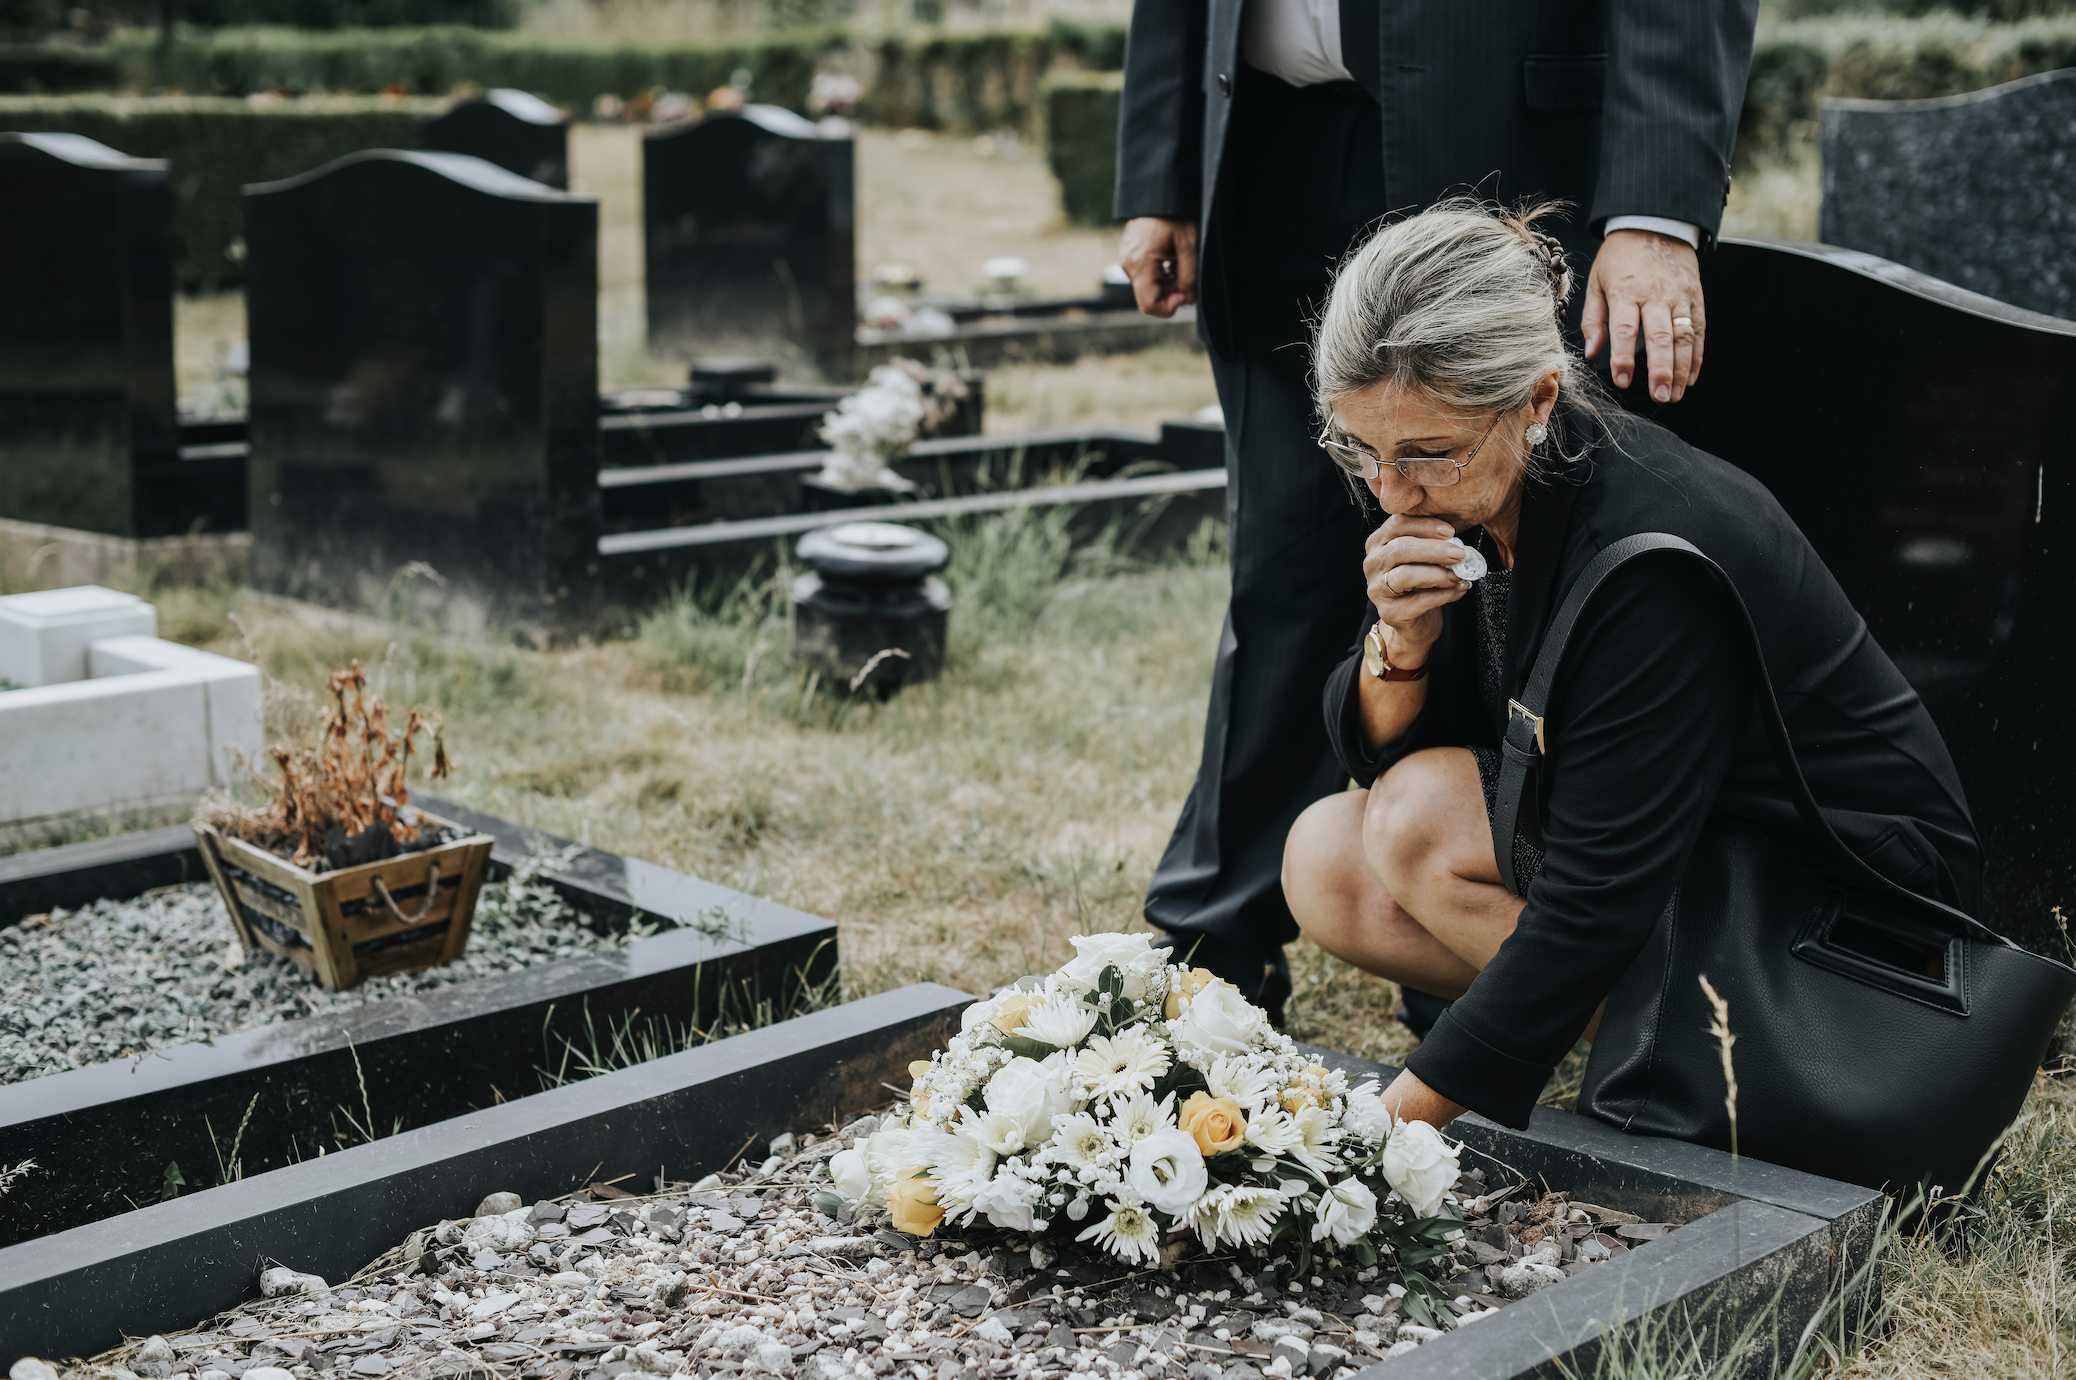 An older woman puts flowers on the grave | Source: Shutterstock